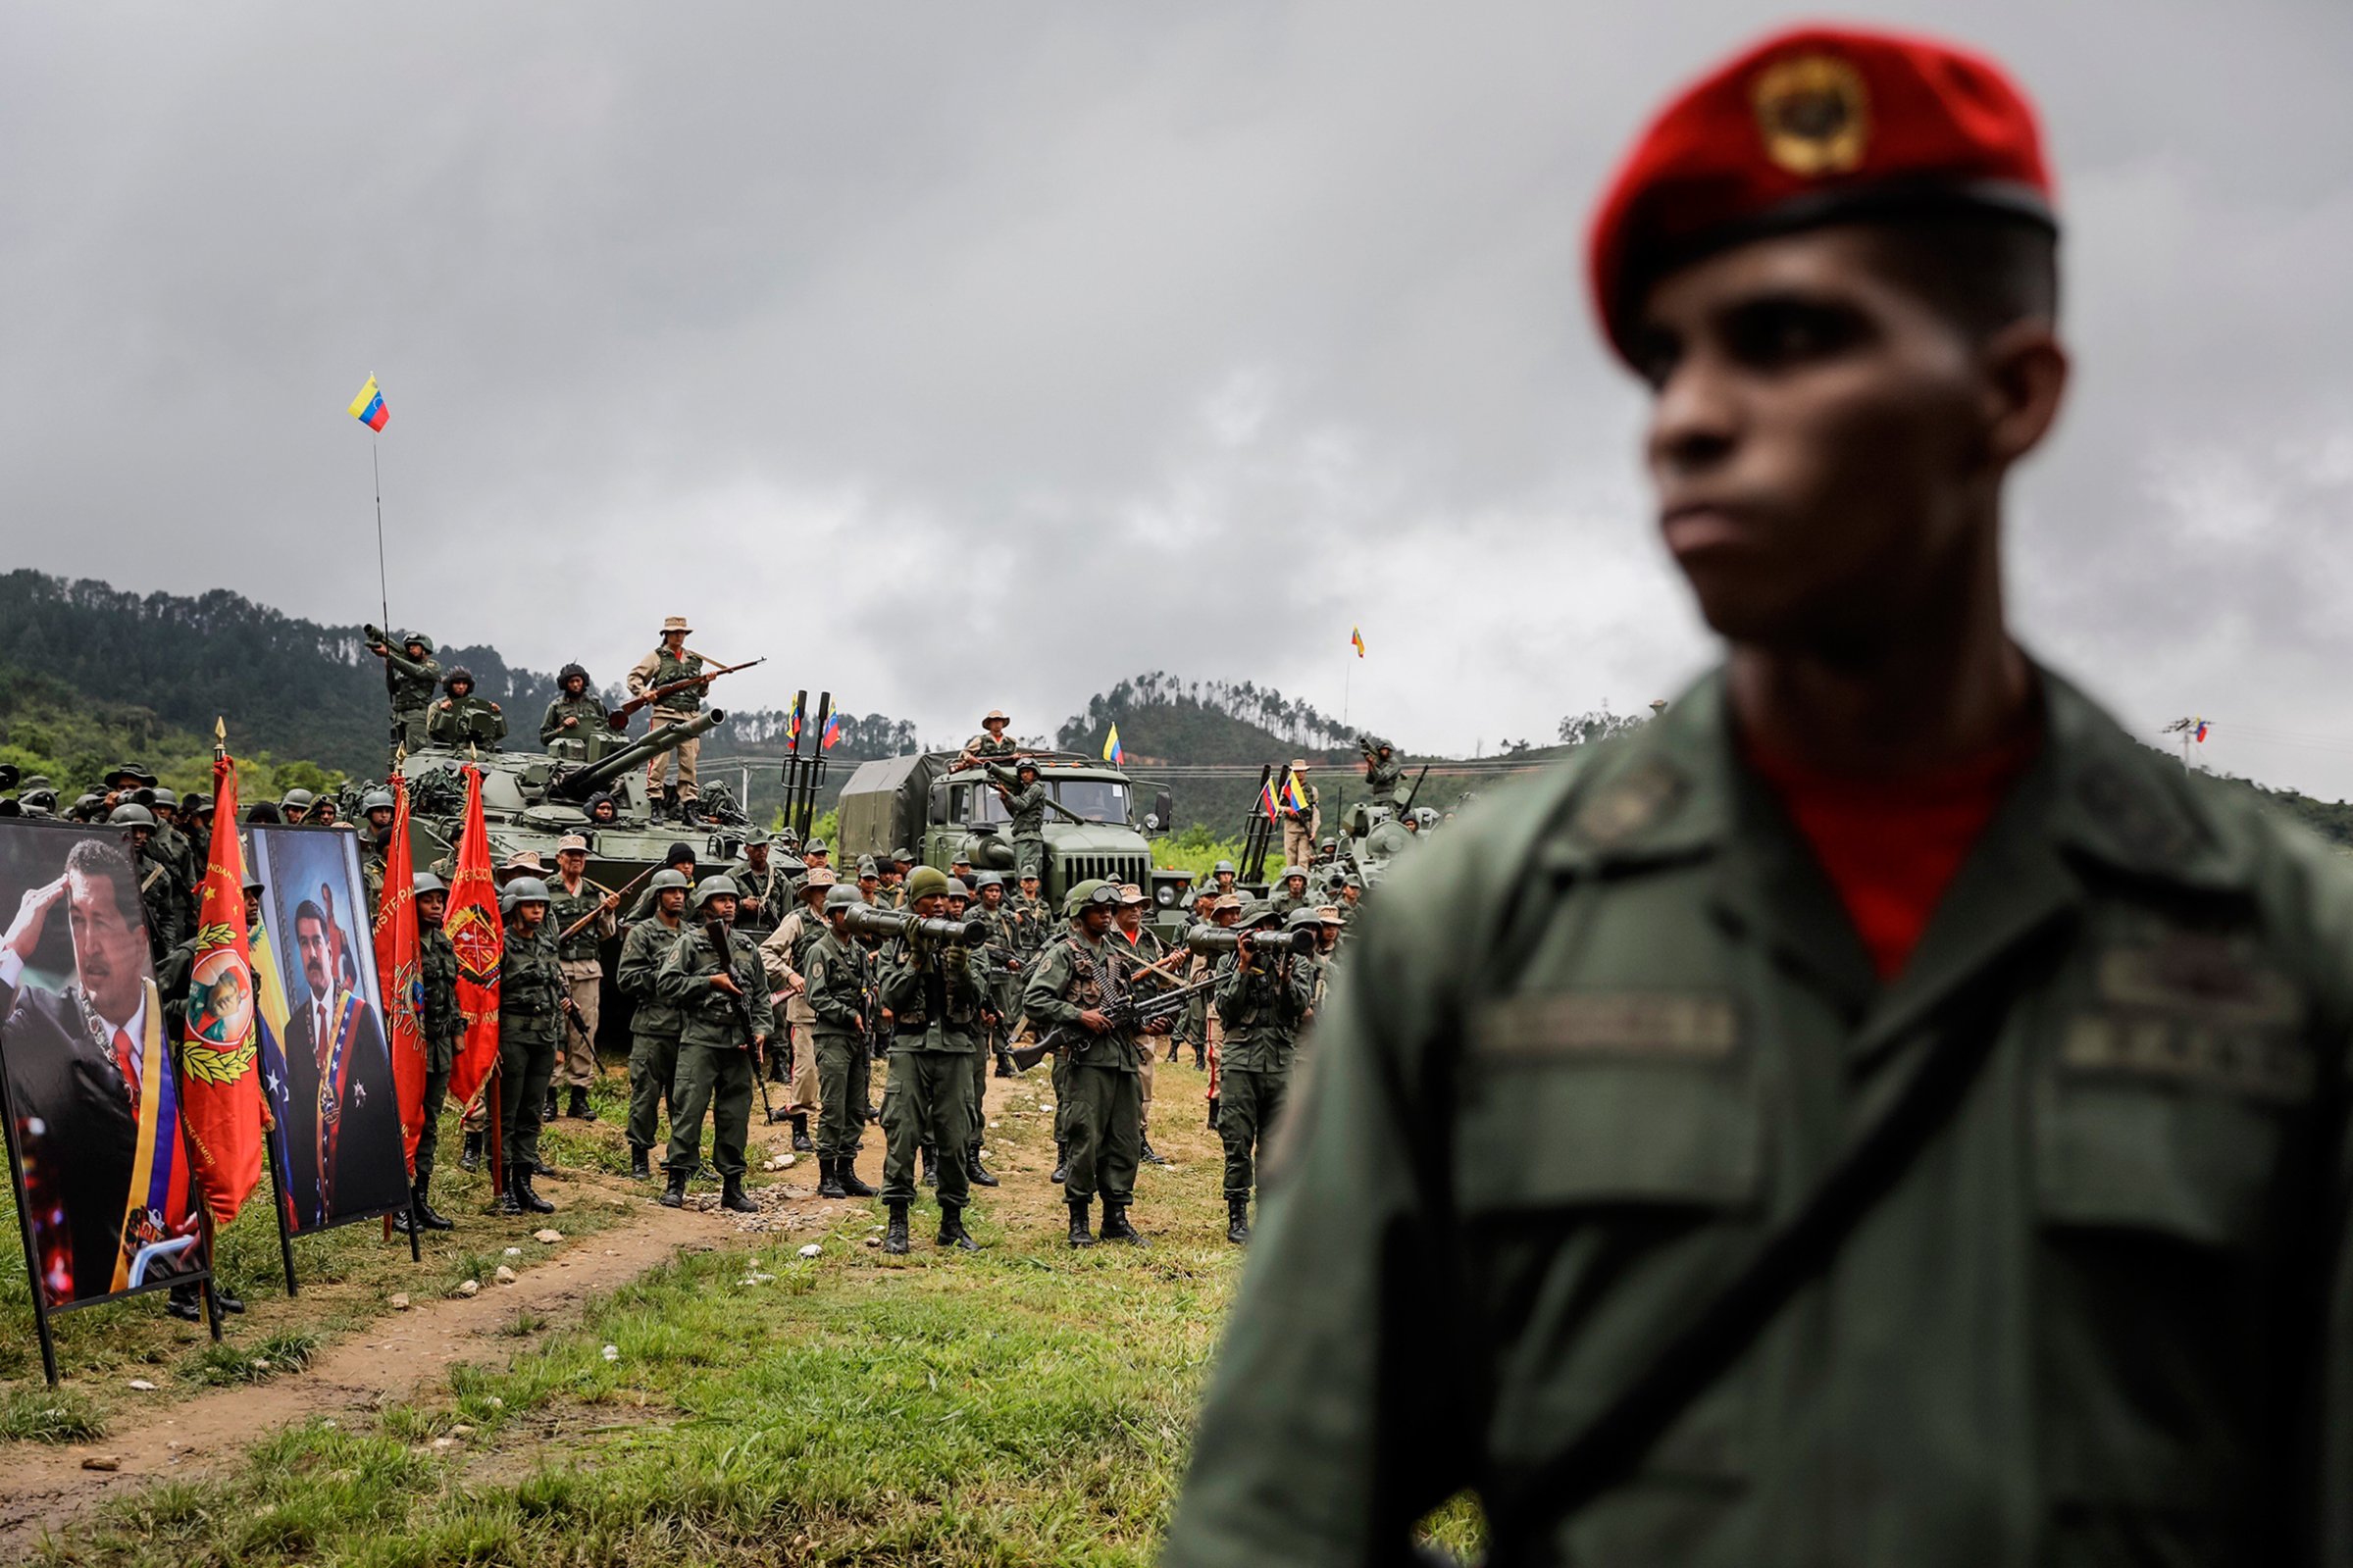 Venezuelan soldiers staged a show of force in Caracas on Aug. 14 in response to Trump’s remarks